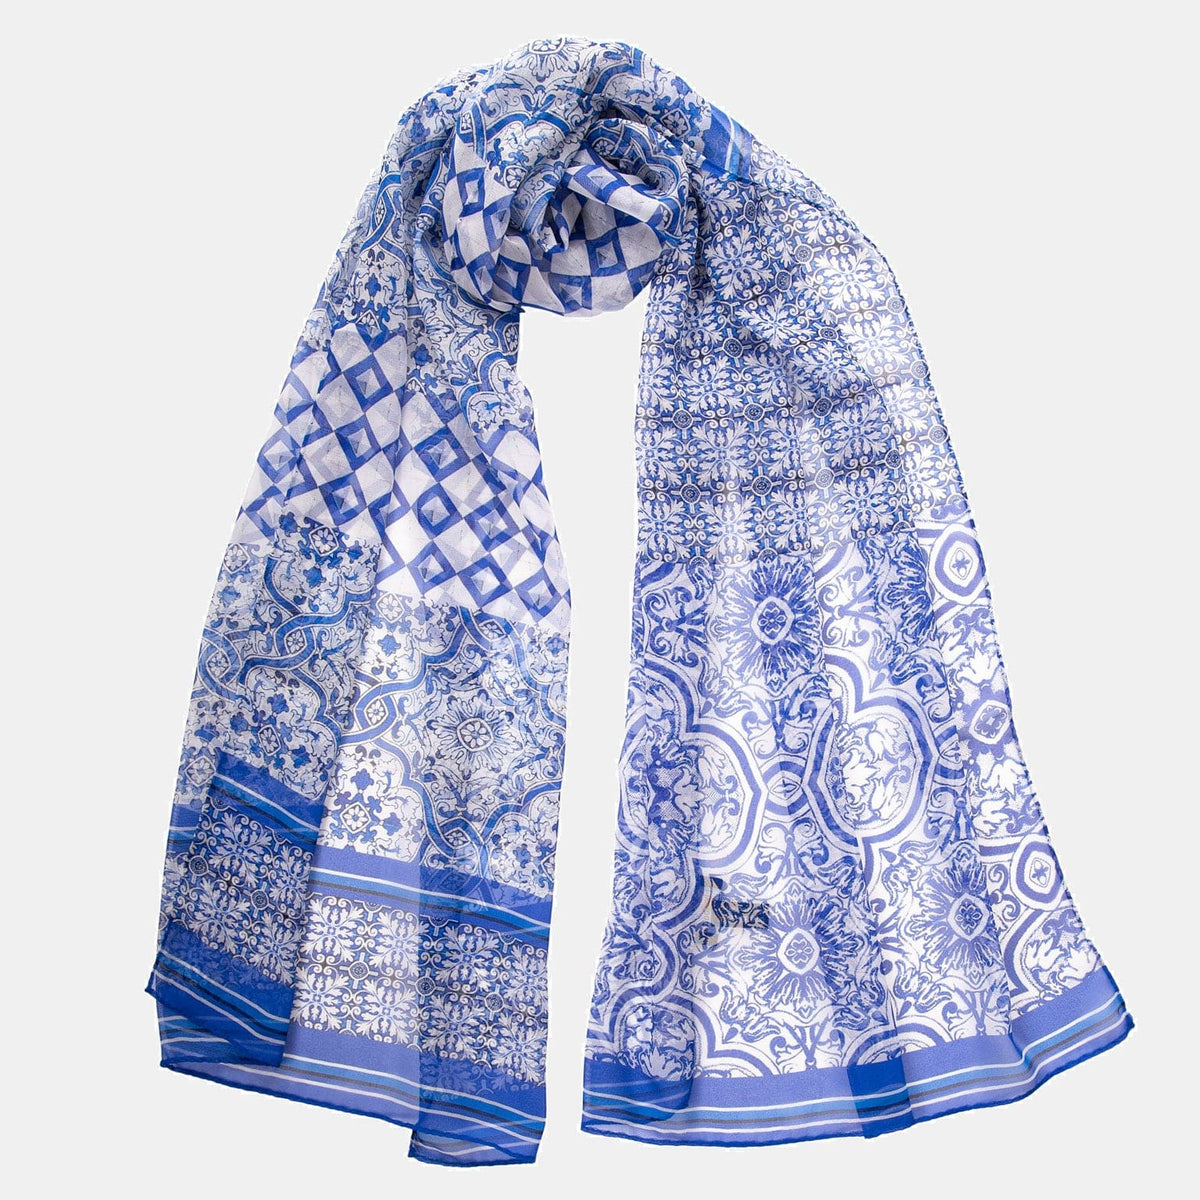 Blue and White Tile Motif Silk Scarf